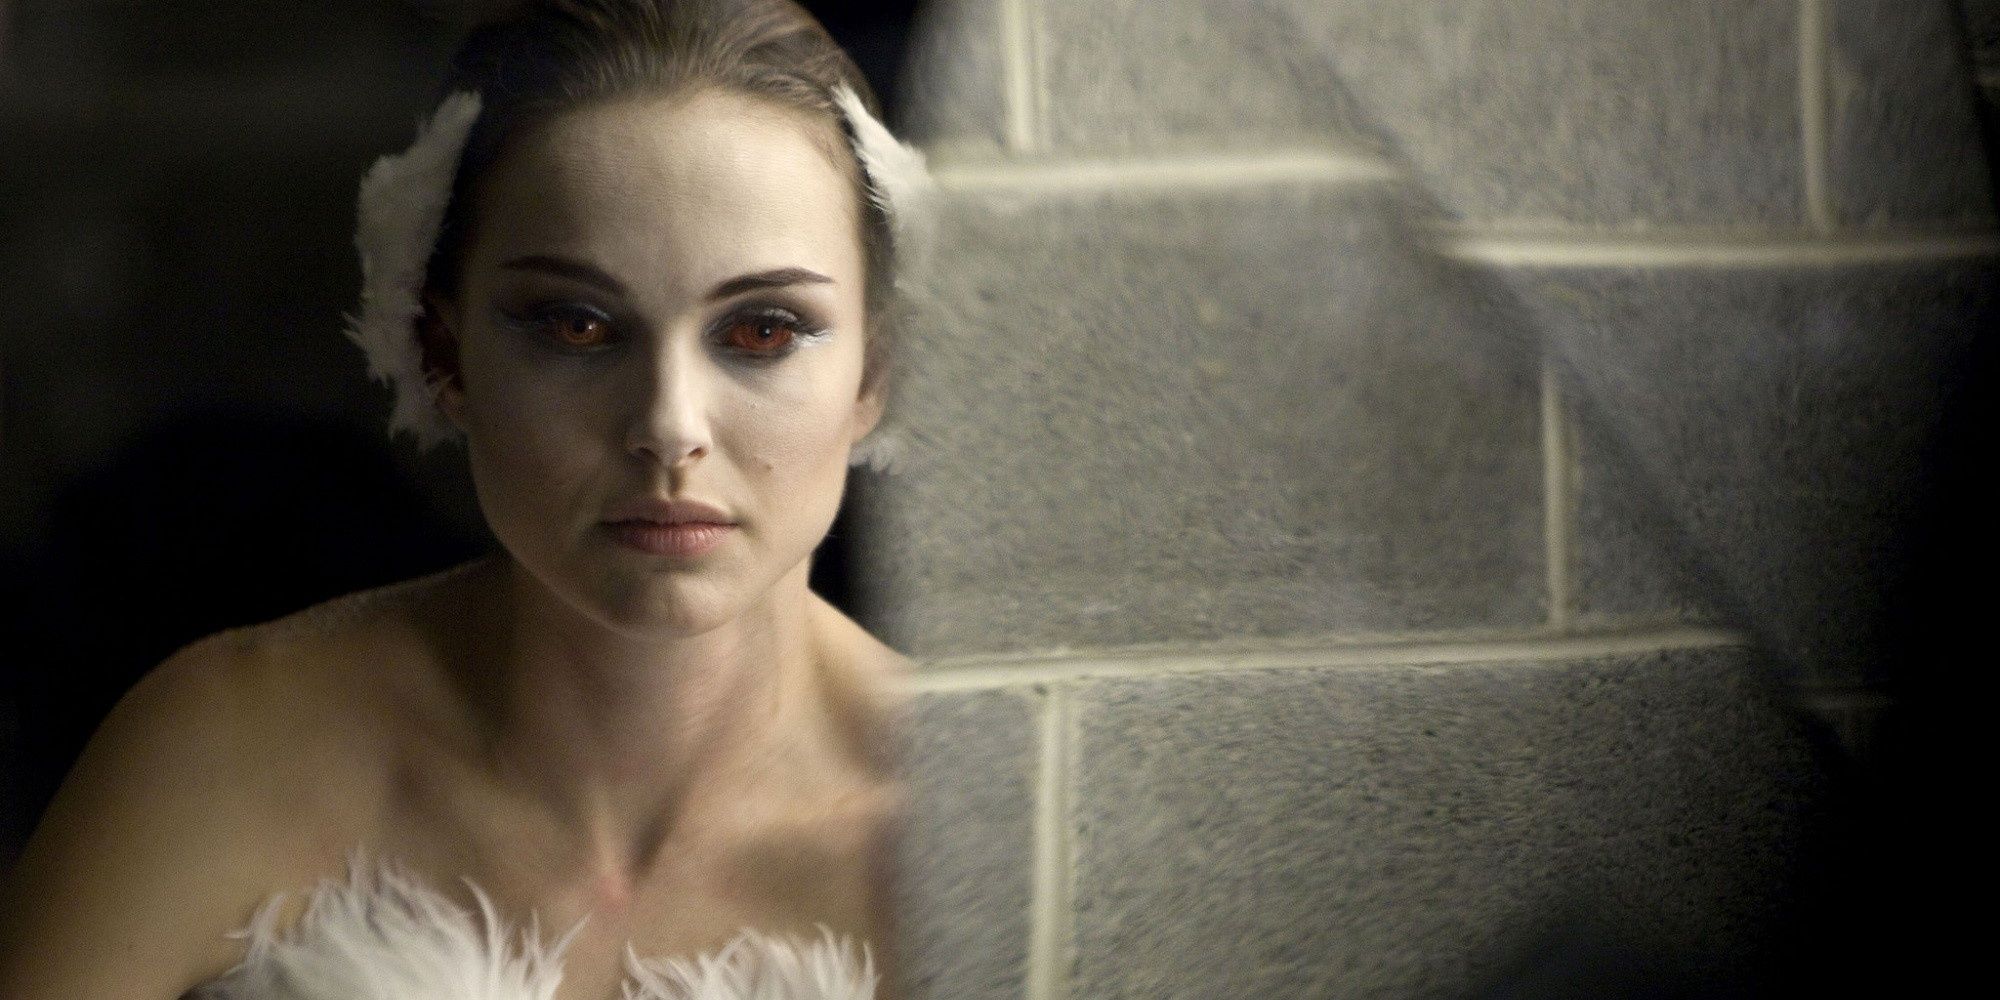 Natalie Portman's character, Nina, staring into a mirror at herself with blood red eyes.